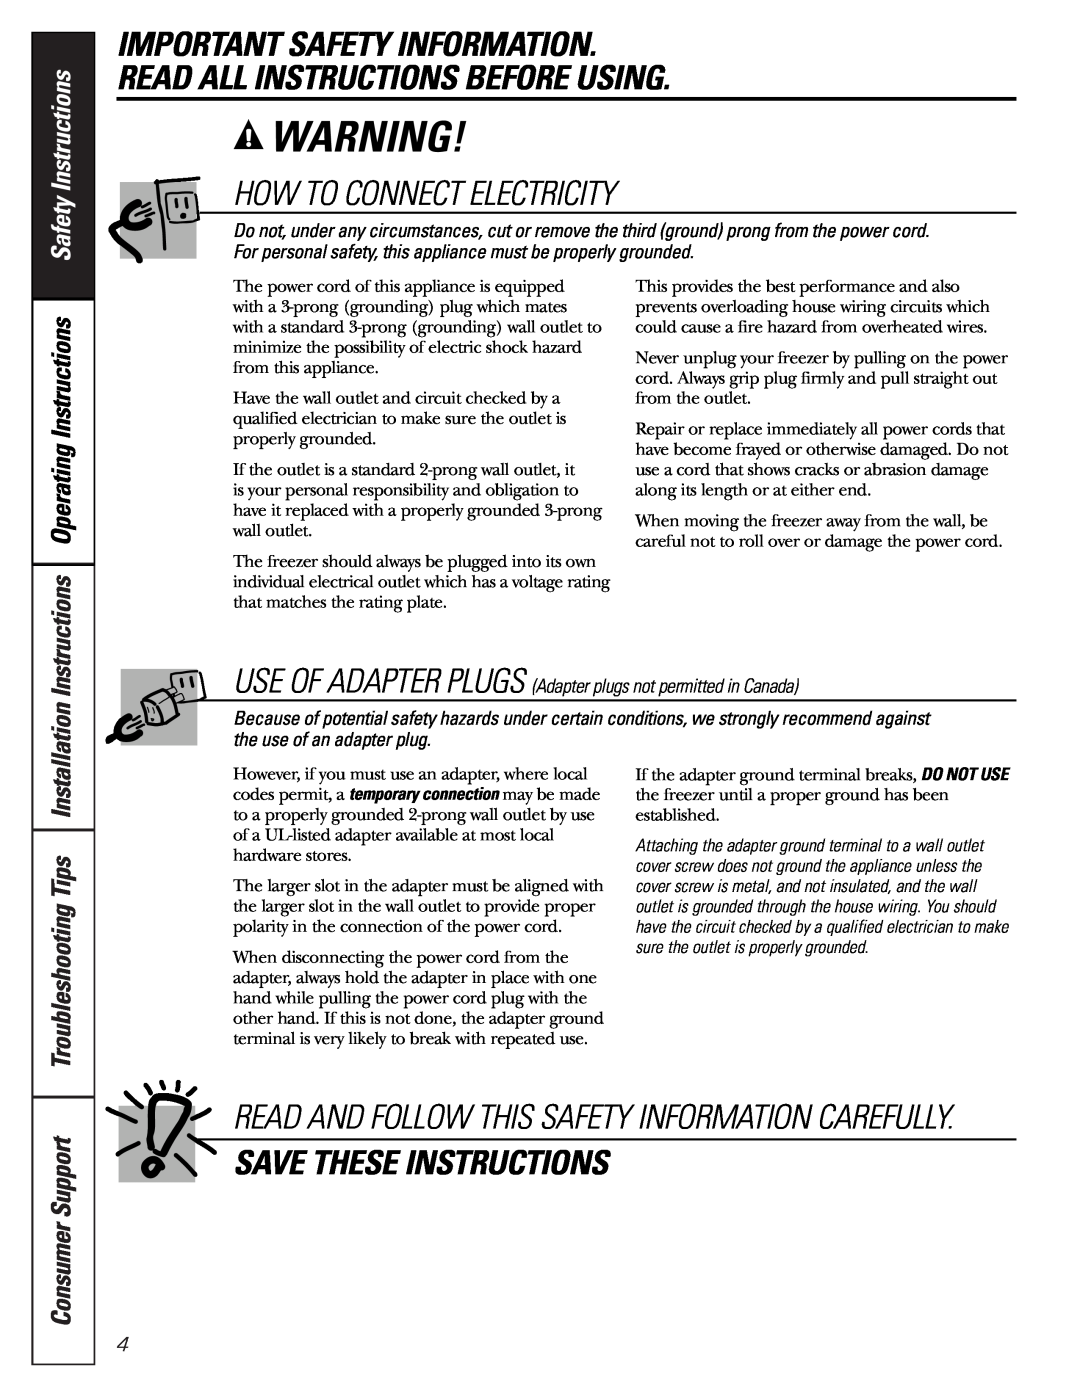 GE FUM5, FCM7, FCM15, FCM25 How To Connect Electricity, Save These Instructions, Troubleshooting Tips, Consumer Support 